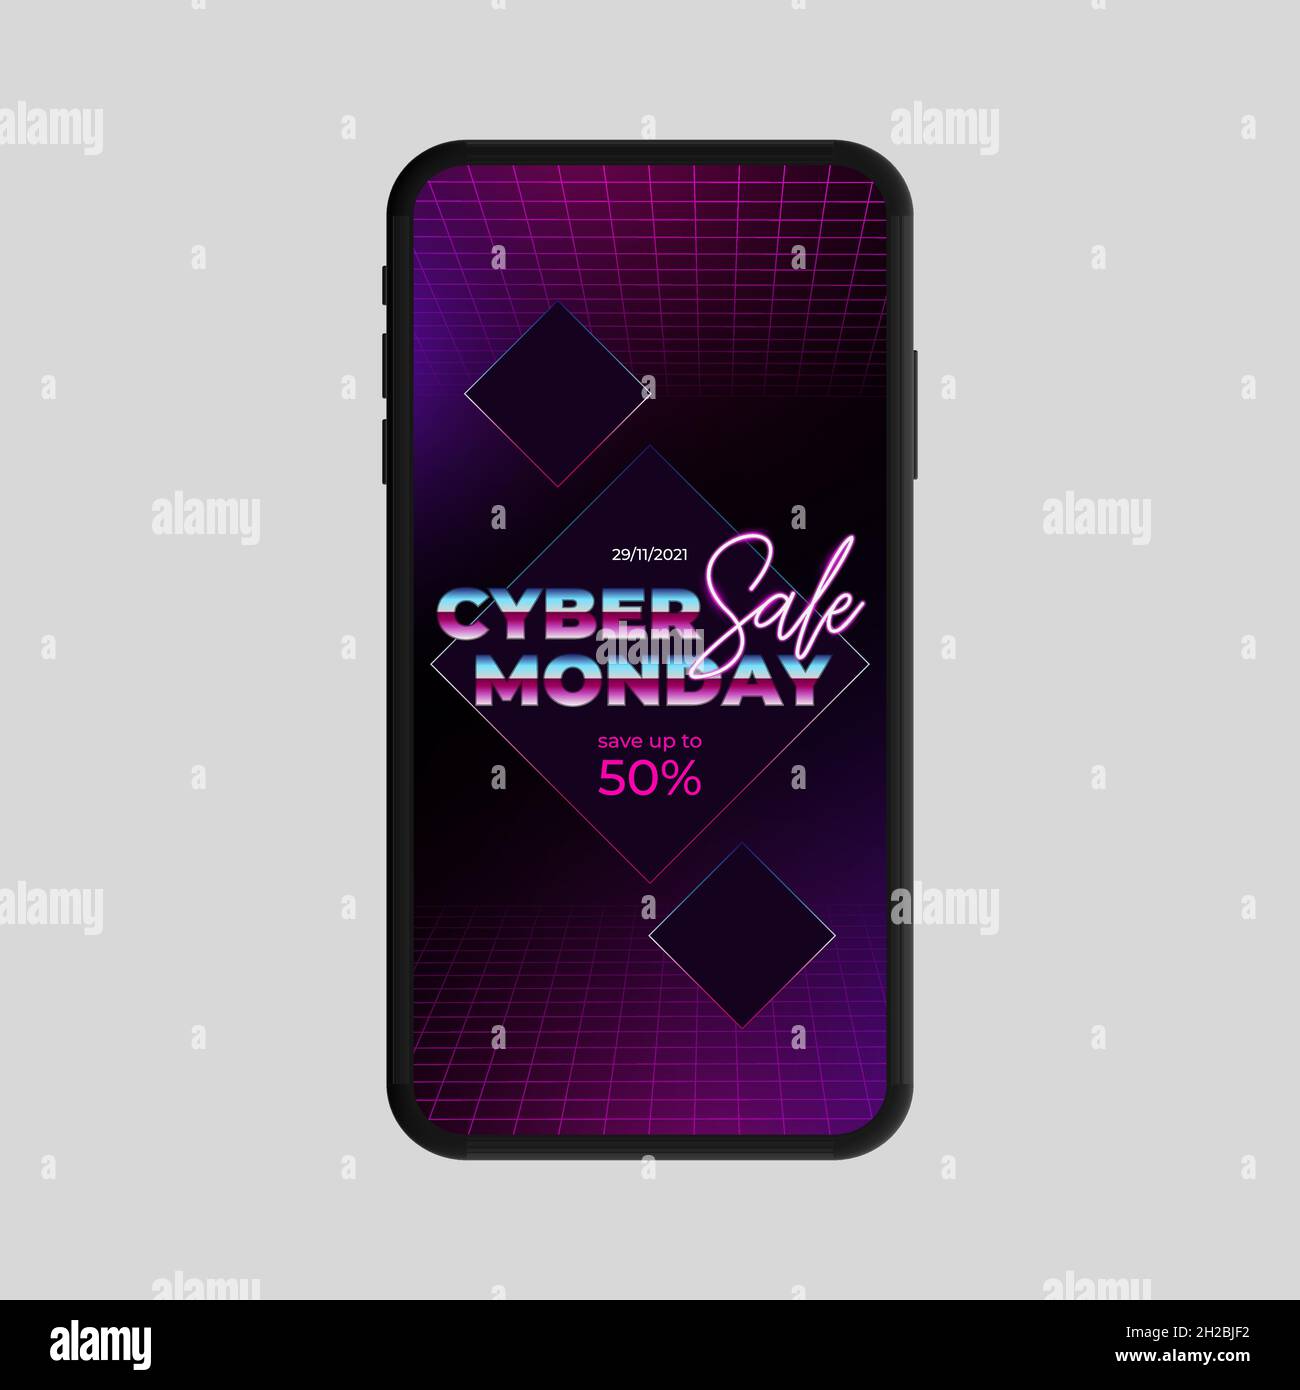 Cyber Monday save up to 50 percents. Vector illustration Stock Vector